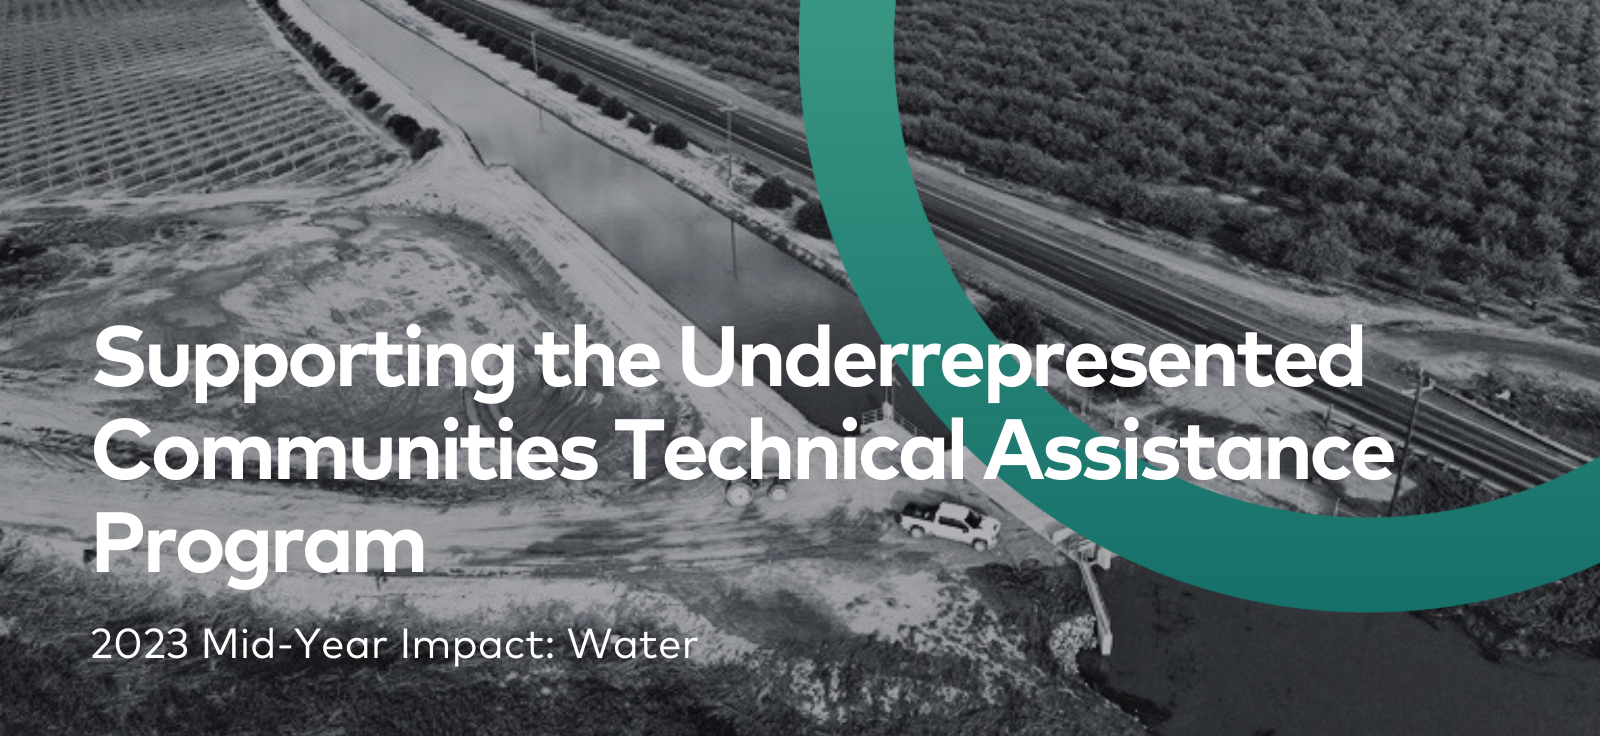 Supporting the Underrepresented Communities Technical Assistance Program - Water 2023 Mid-year Impact